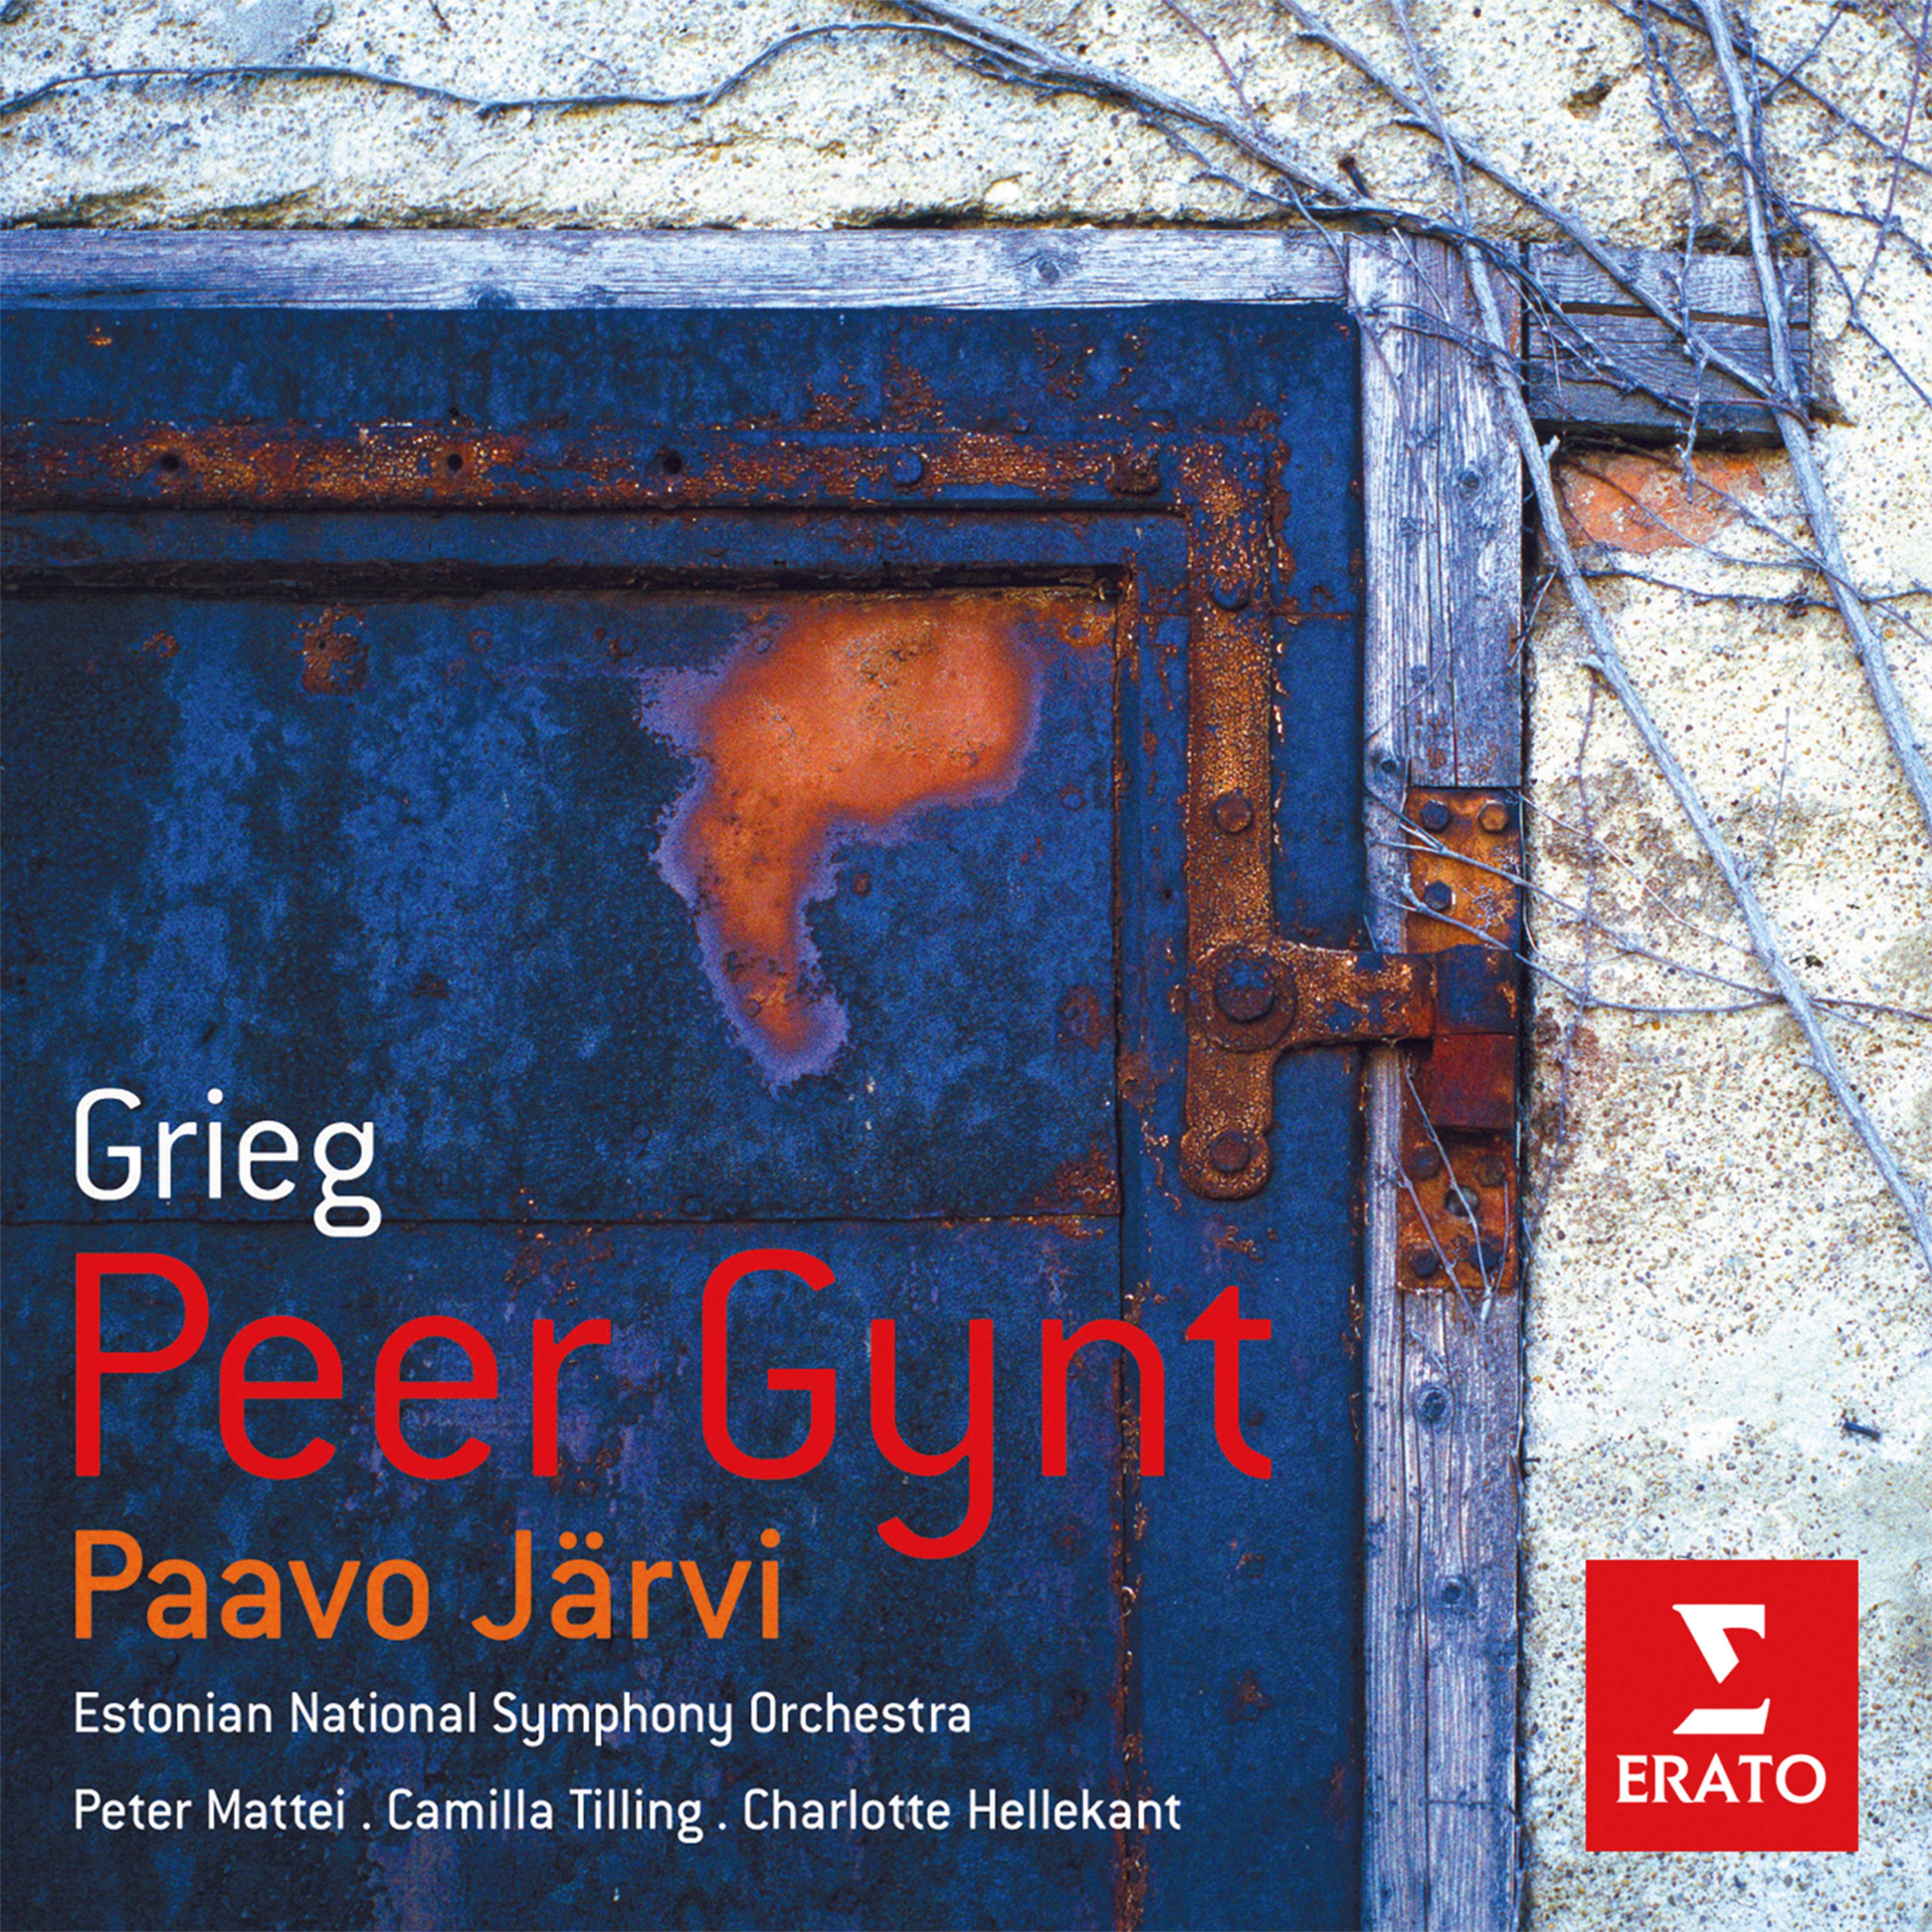 Peer Gynt, Op. 23, Act IV:No. 18, Solveig's Song